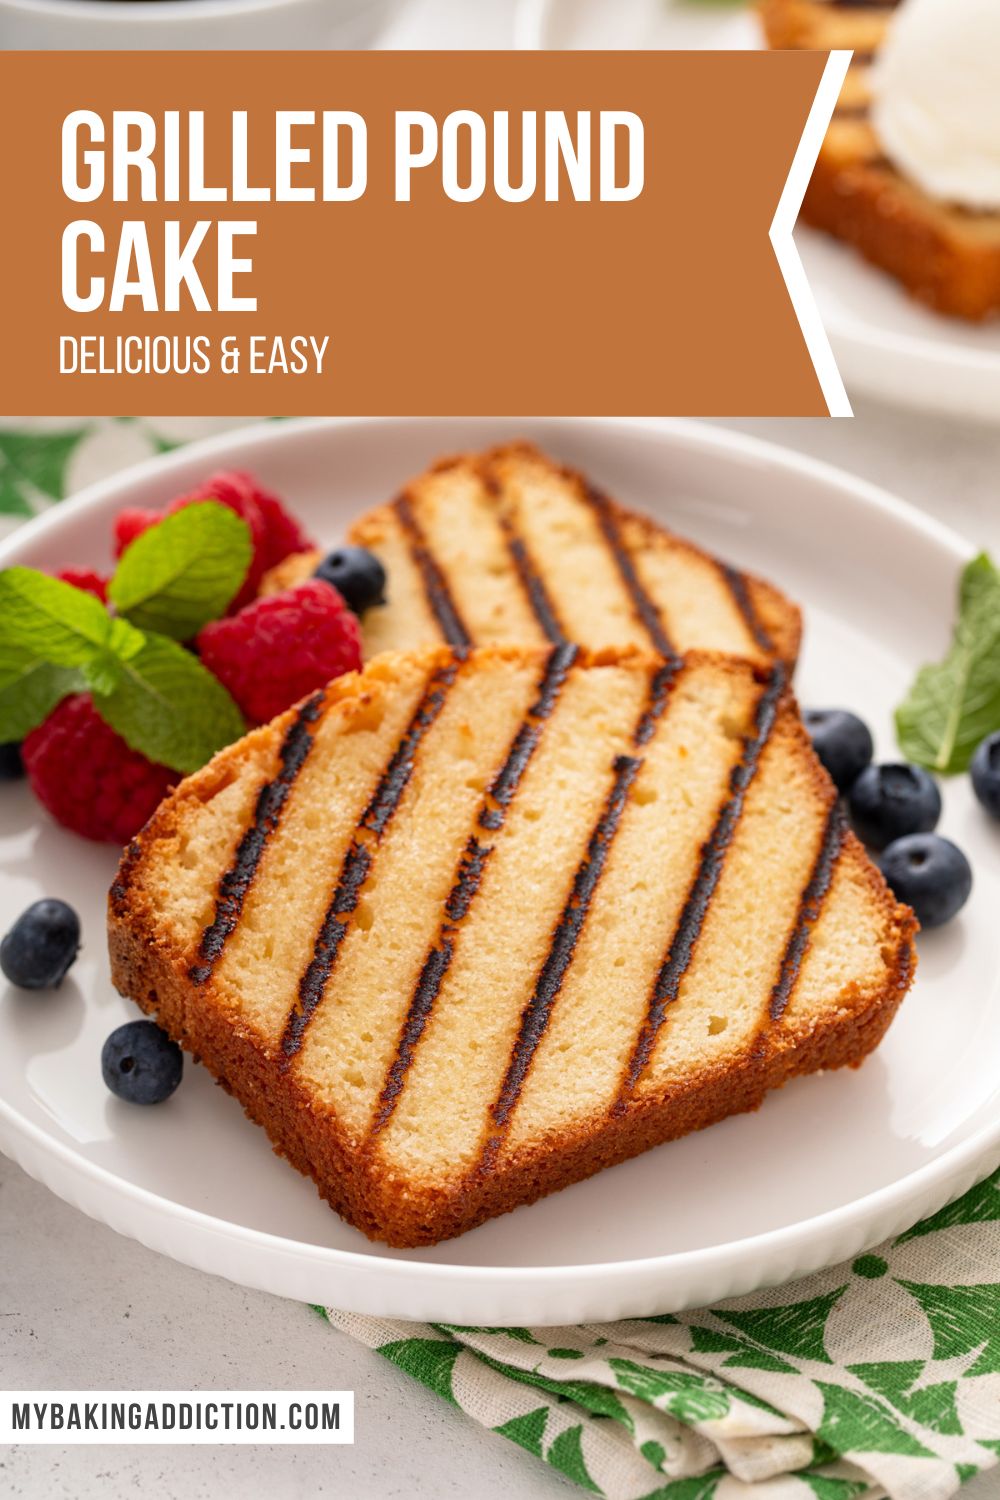 Two slices of grilled pound cake on a white plate with fresh raspberries and blueberries. Text overlay includes recipe name.